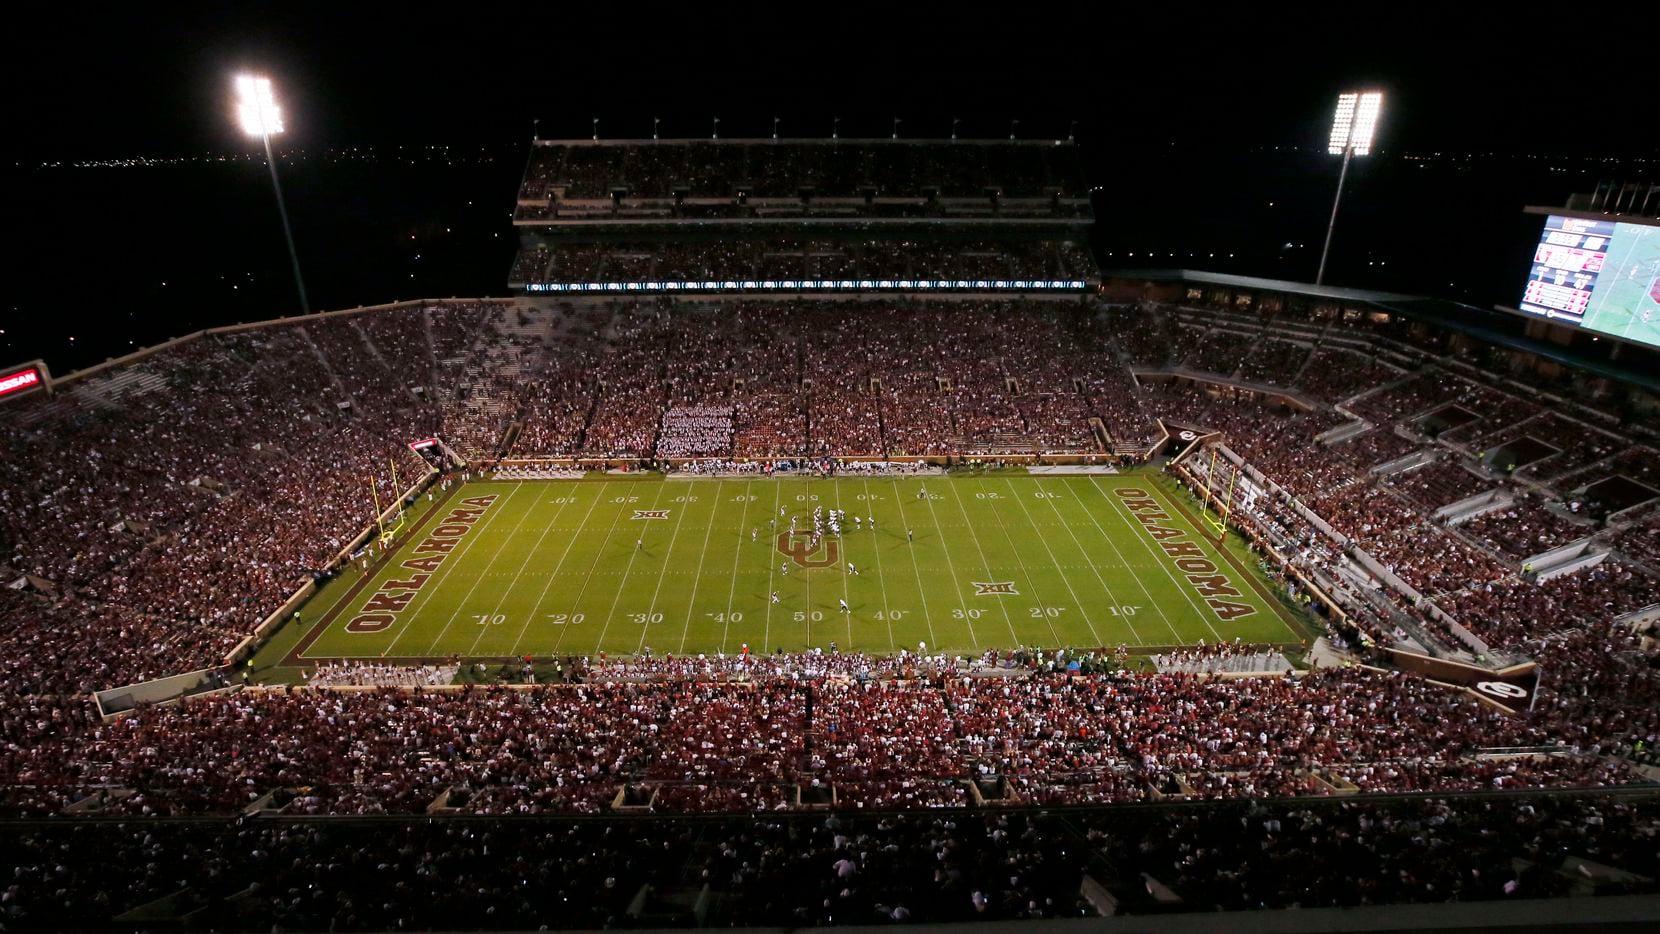 Oklahoma faces Louisiana Monroe in the third quarter of an NCAA college football game in Norman, Okla., during their home opener in their newly renovated stadium, Saturday, Sept. 10, 2016. The south end of the Gaylord Family - Oklahoma Memorial Stadium, at right, has been enclosed and is now a complete bowl.